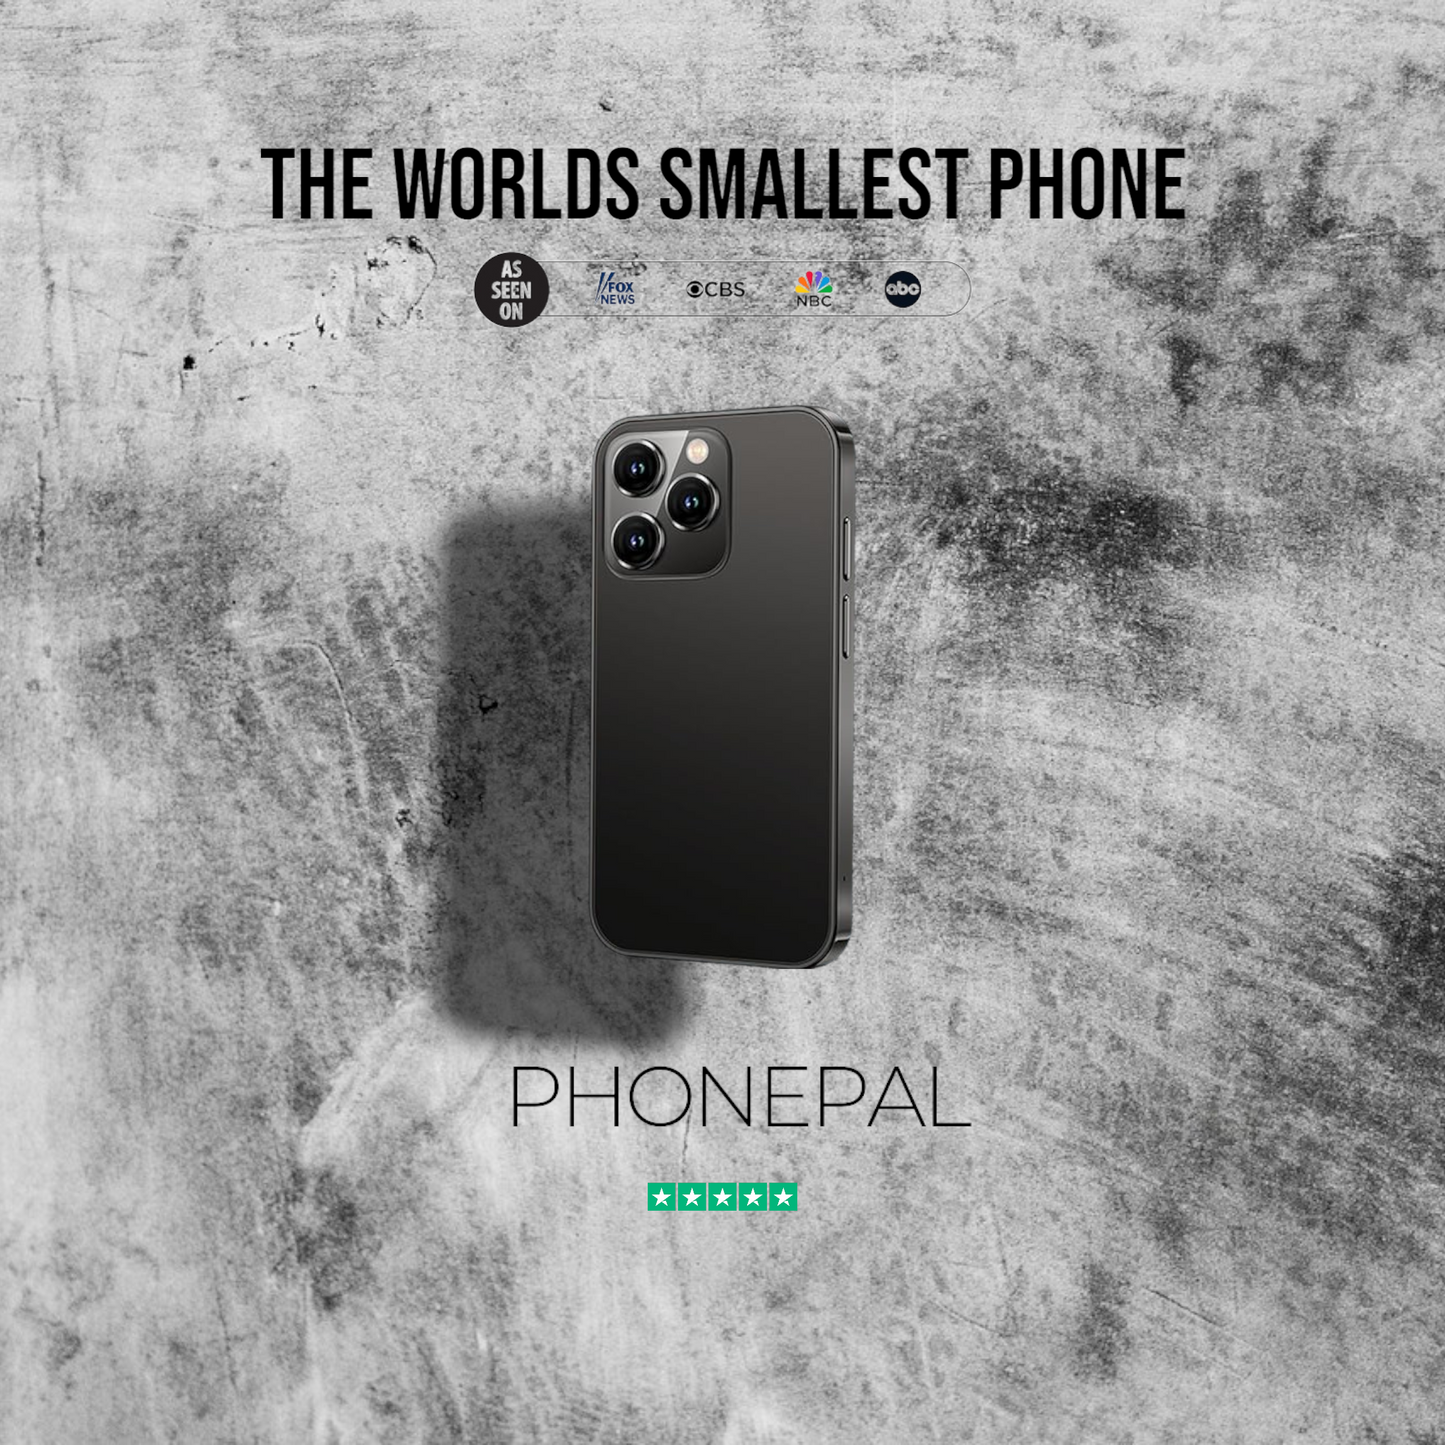 POCKETPAL™ - THE WORLD'S SMALLEST PHONE